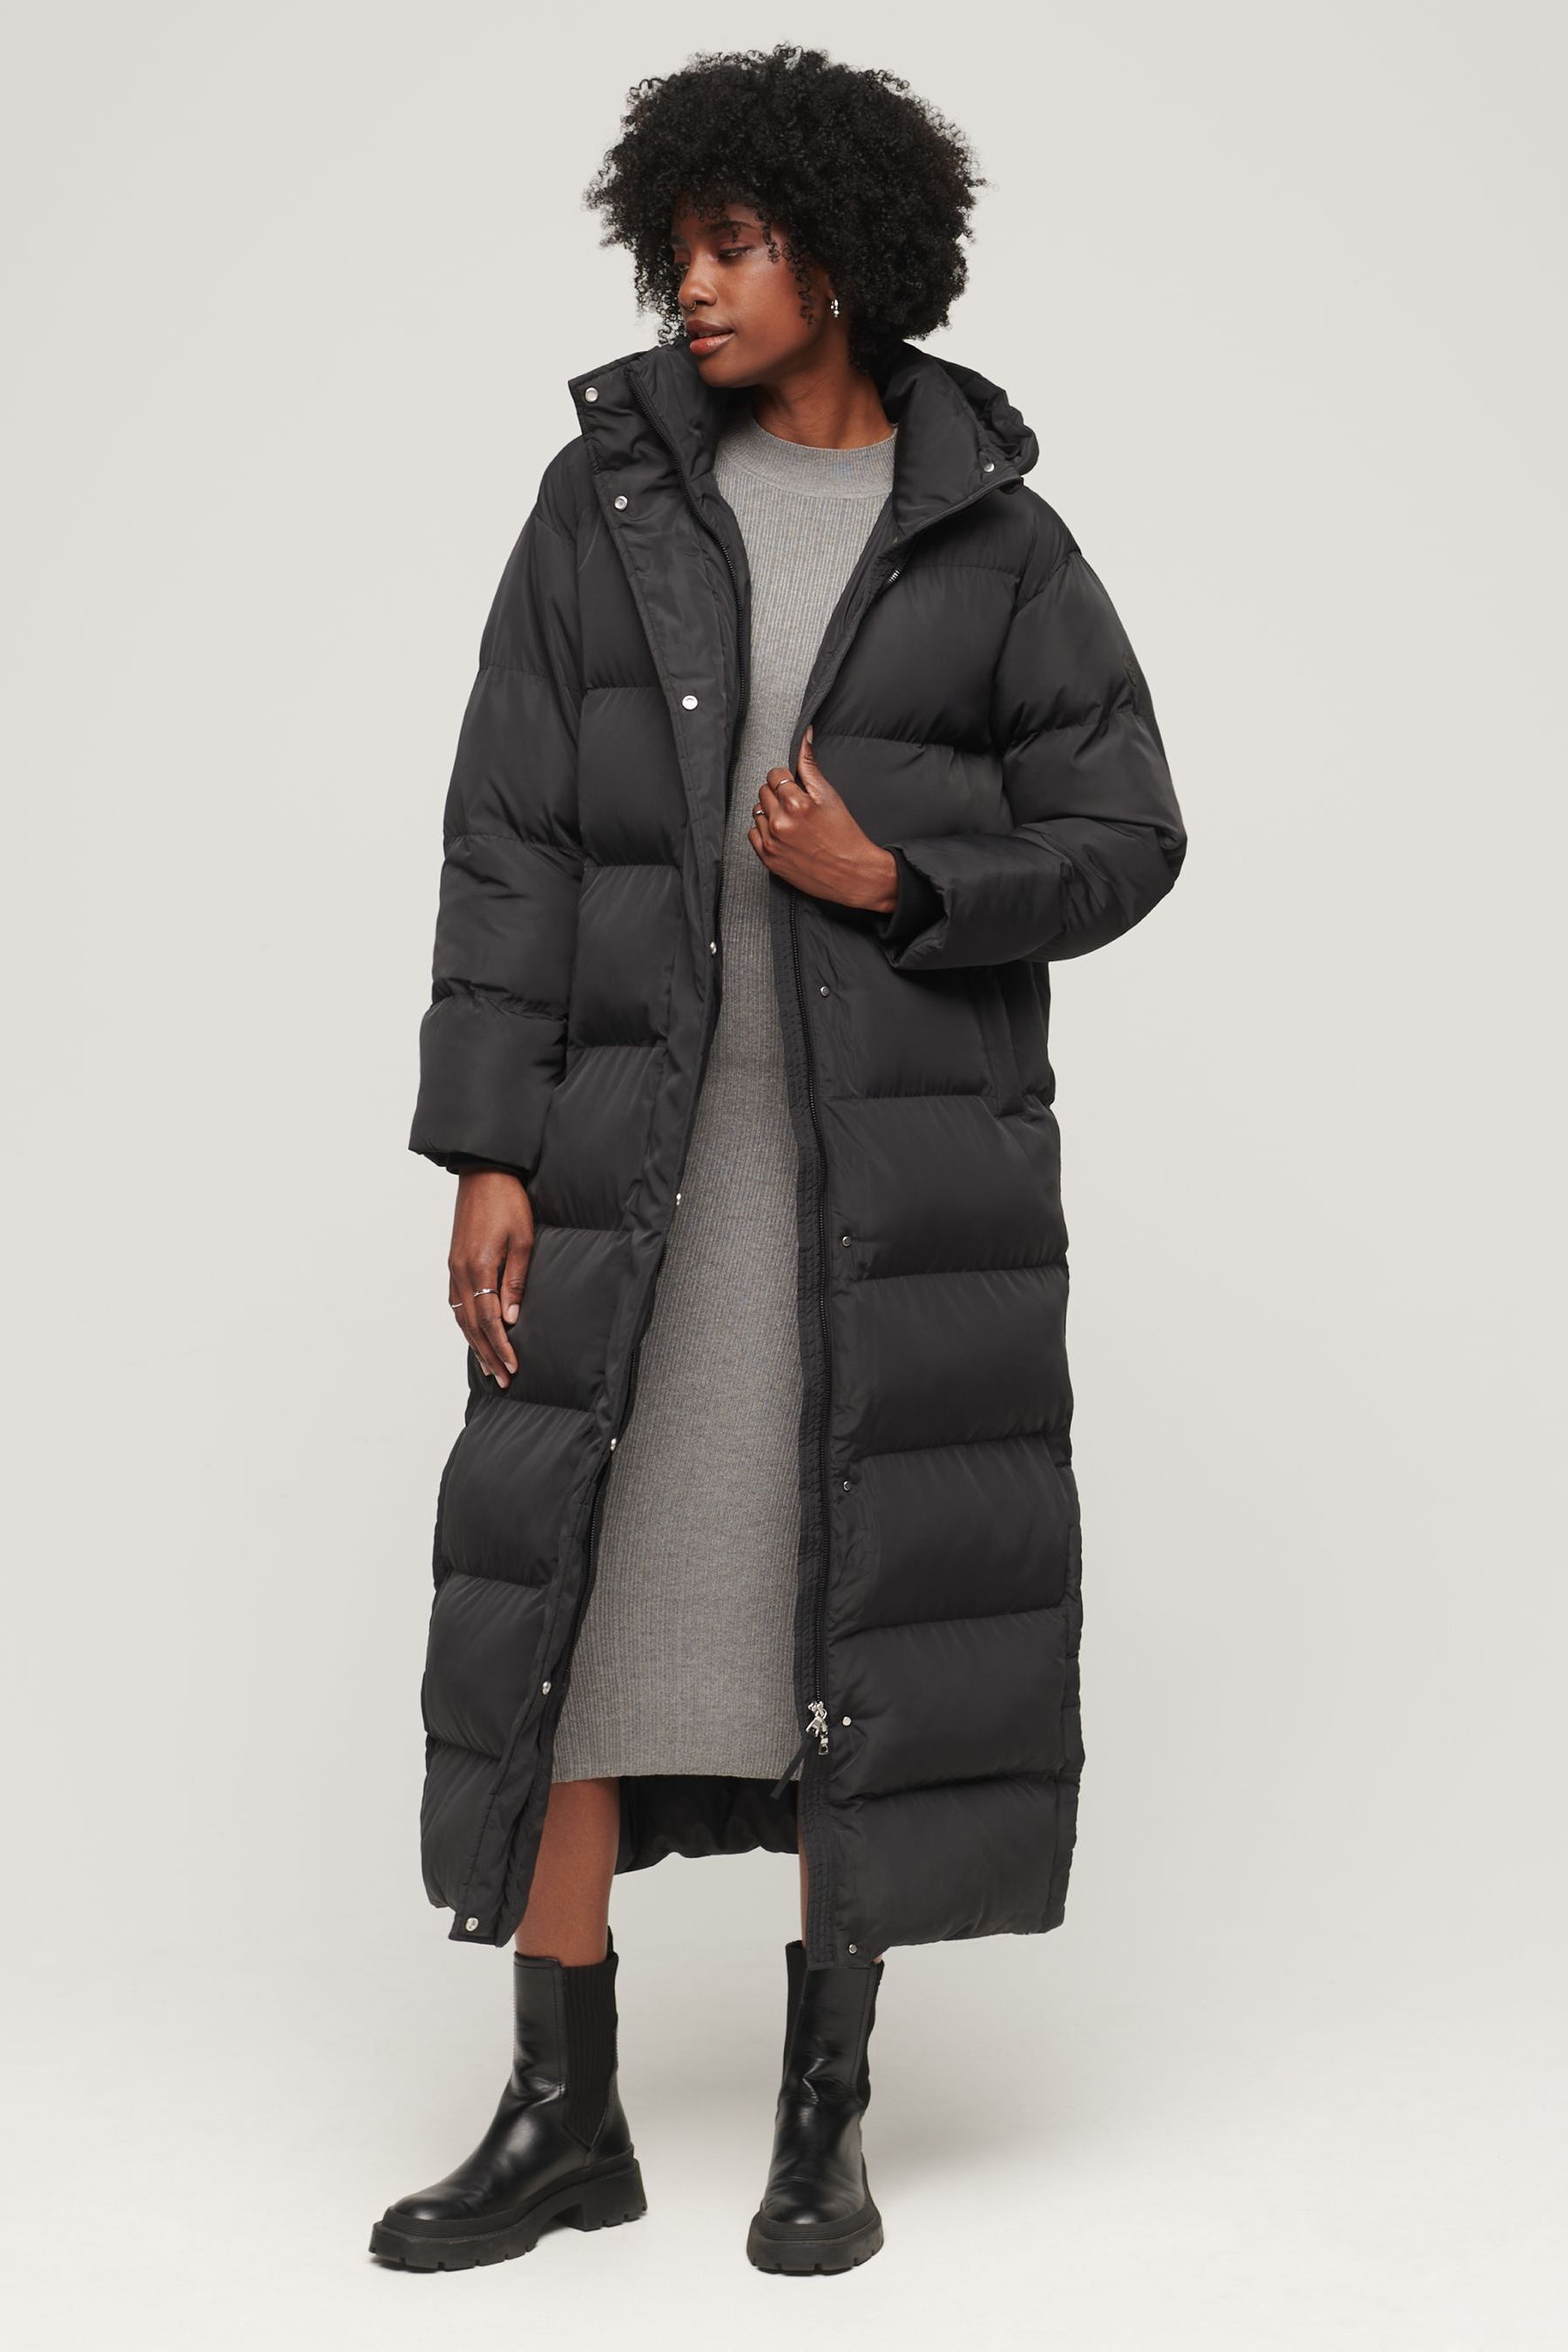 Buy Superdry Black Maxi Hooded Puffer Coat from the Next UK online shop